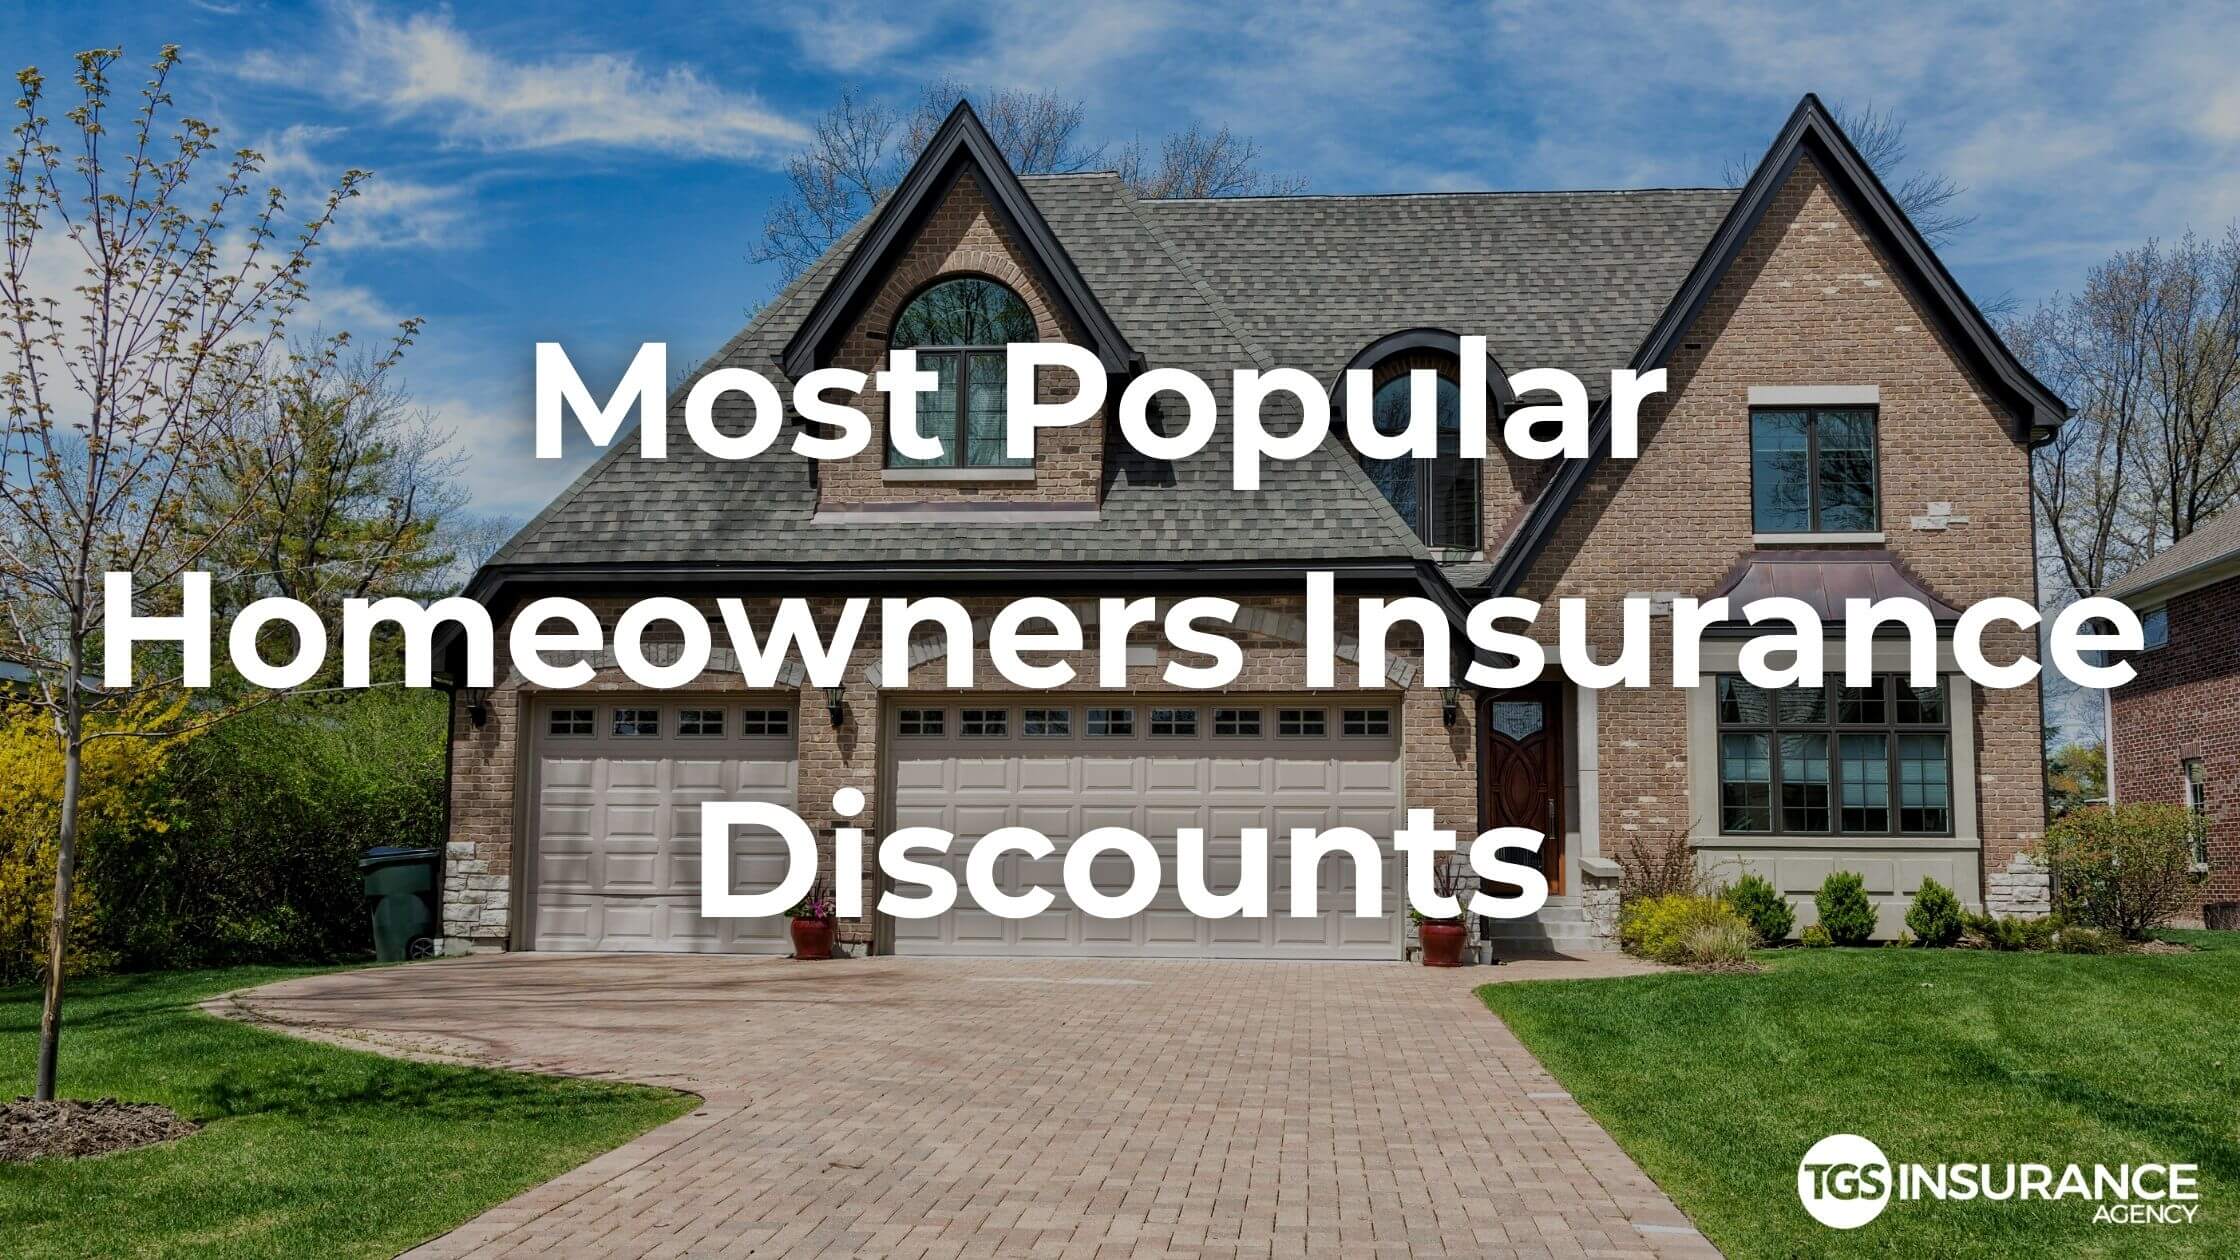 Most Popular Homeowners Insurance Discounts TGS